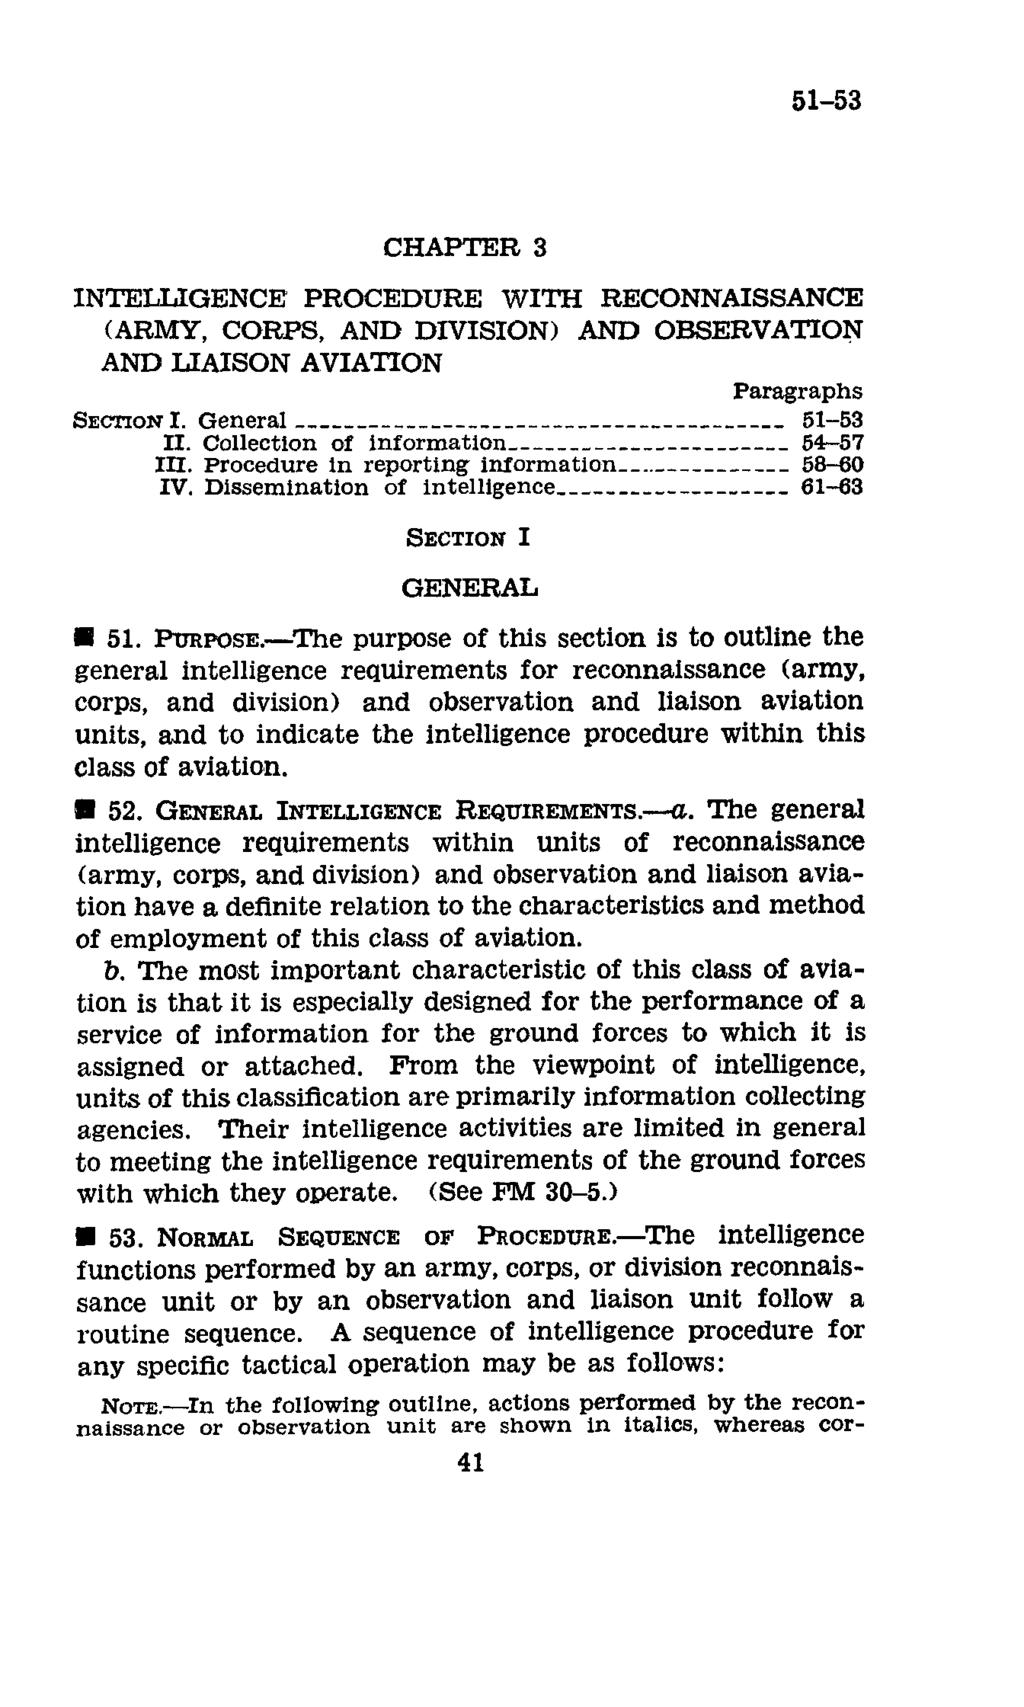 51-53 CHAPTER 3 INTELLIGENCE PROCEDURE WITH RECONNAISSANCE (ARMY, CORPS, AND DIVISION) AND OBSERVATION AND LIAISON AVIATION Paragraphs SECTOoNI. General ---- ---.------- - ---------------- 51-53 II.